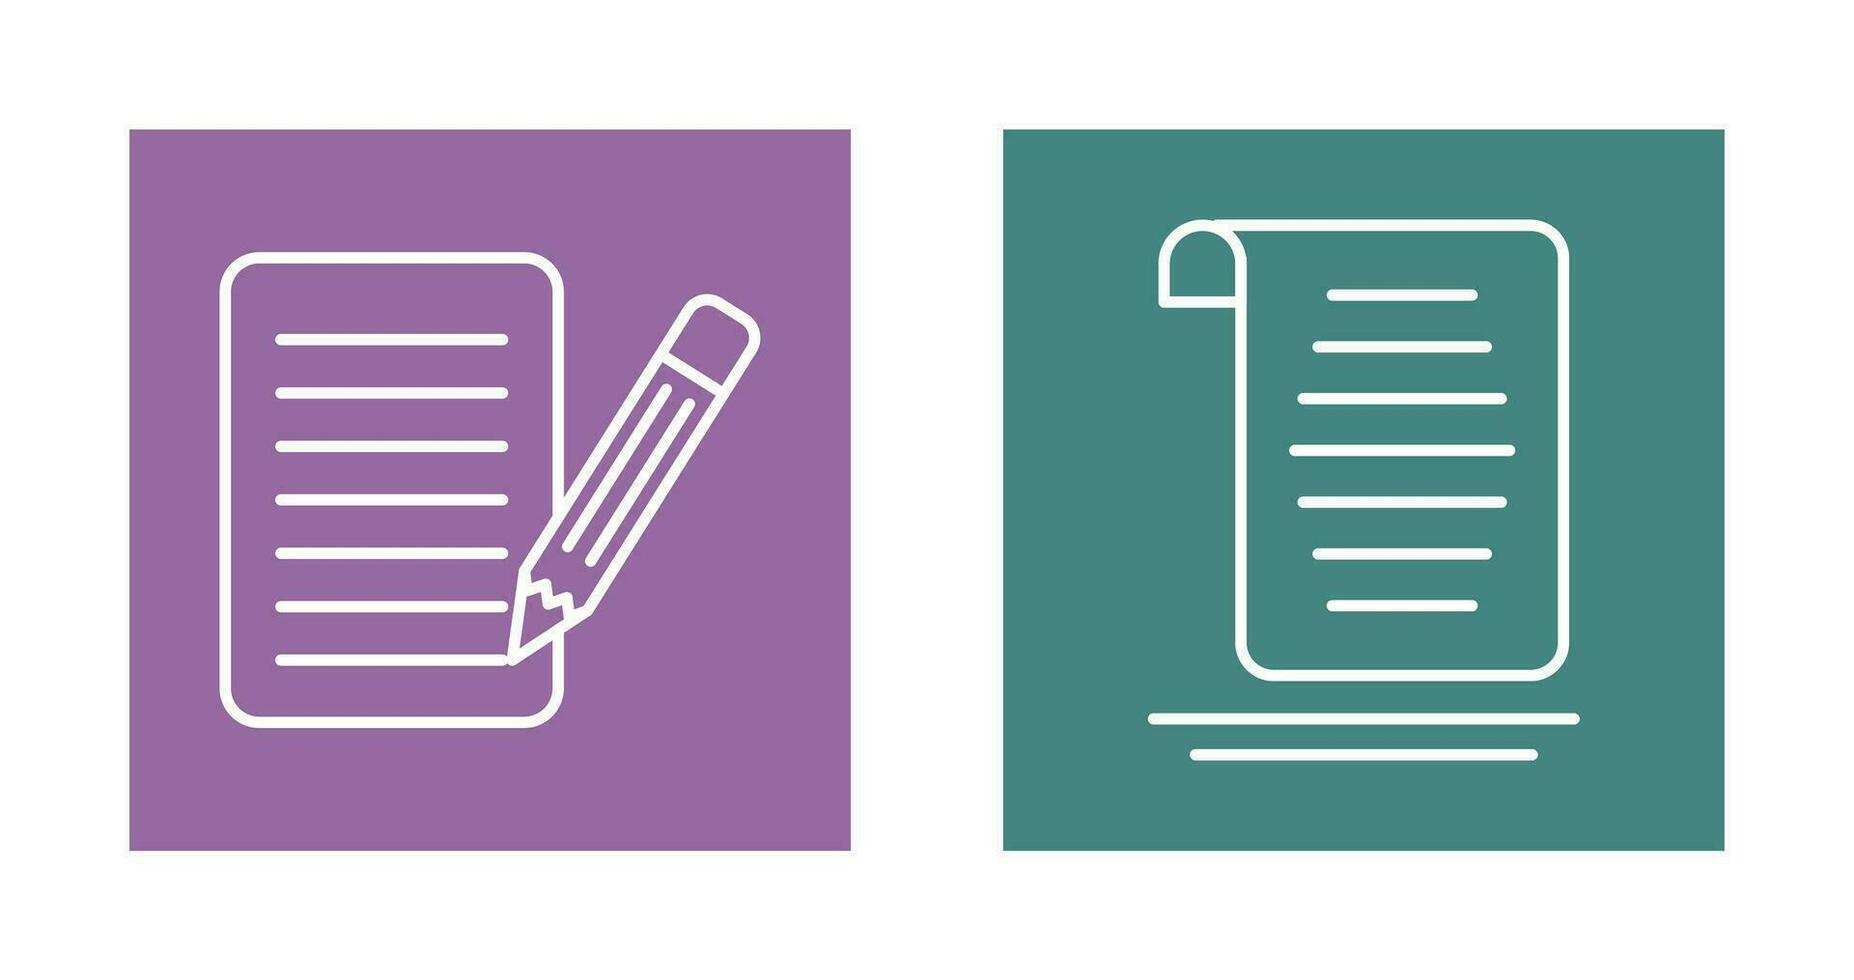 checklist and document  Icon vector